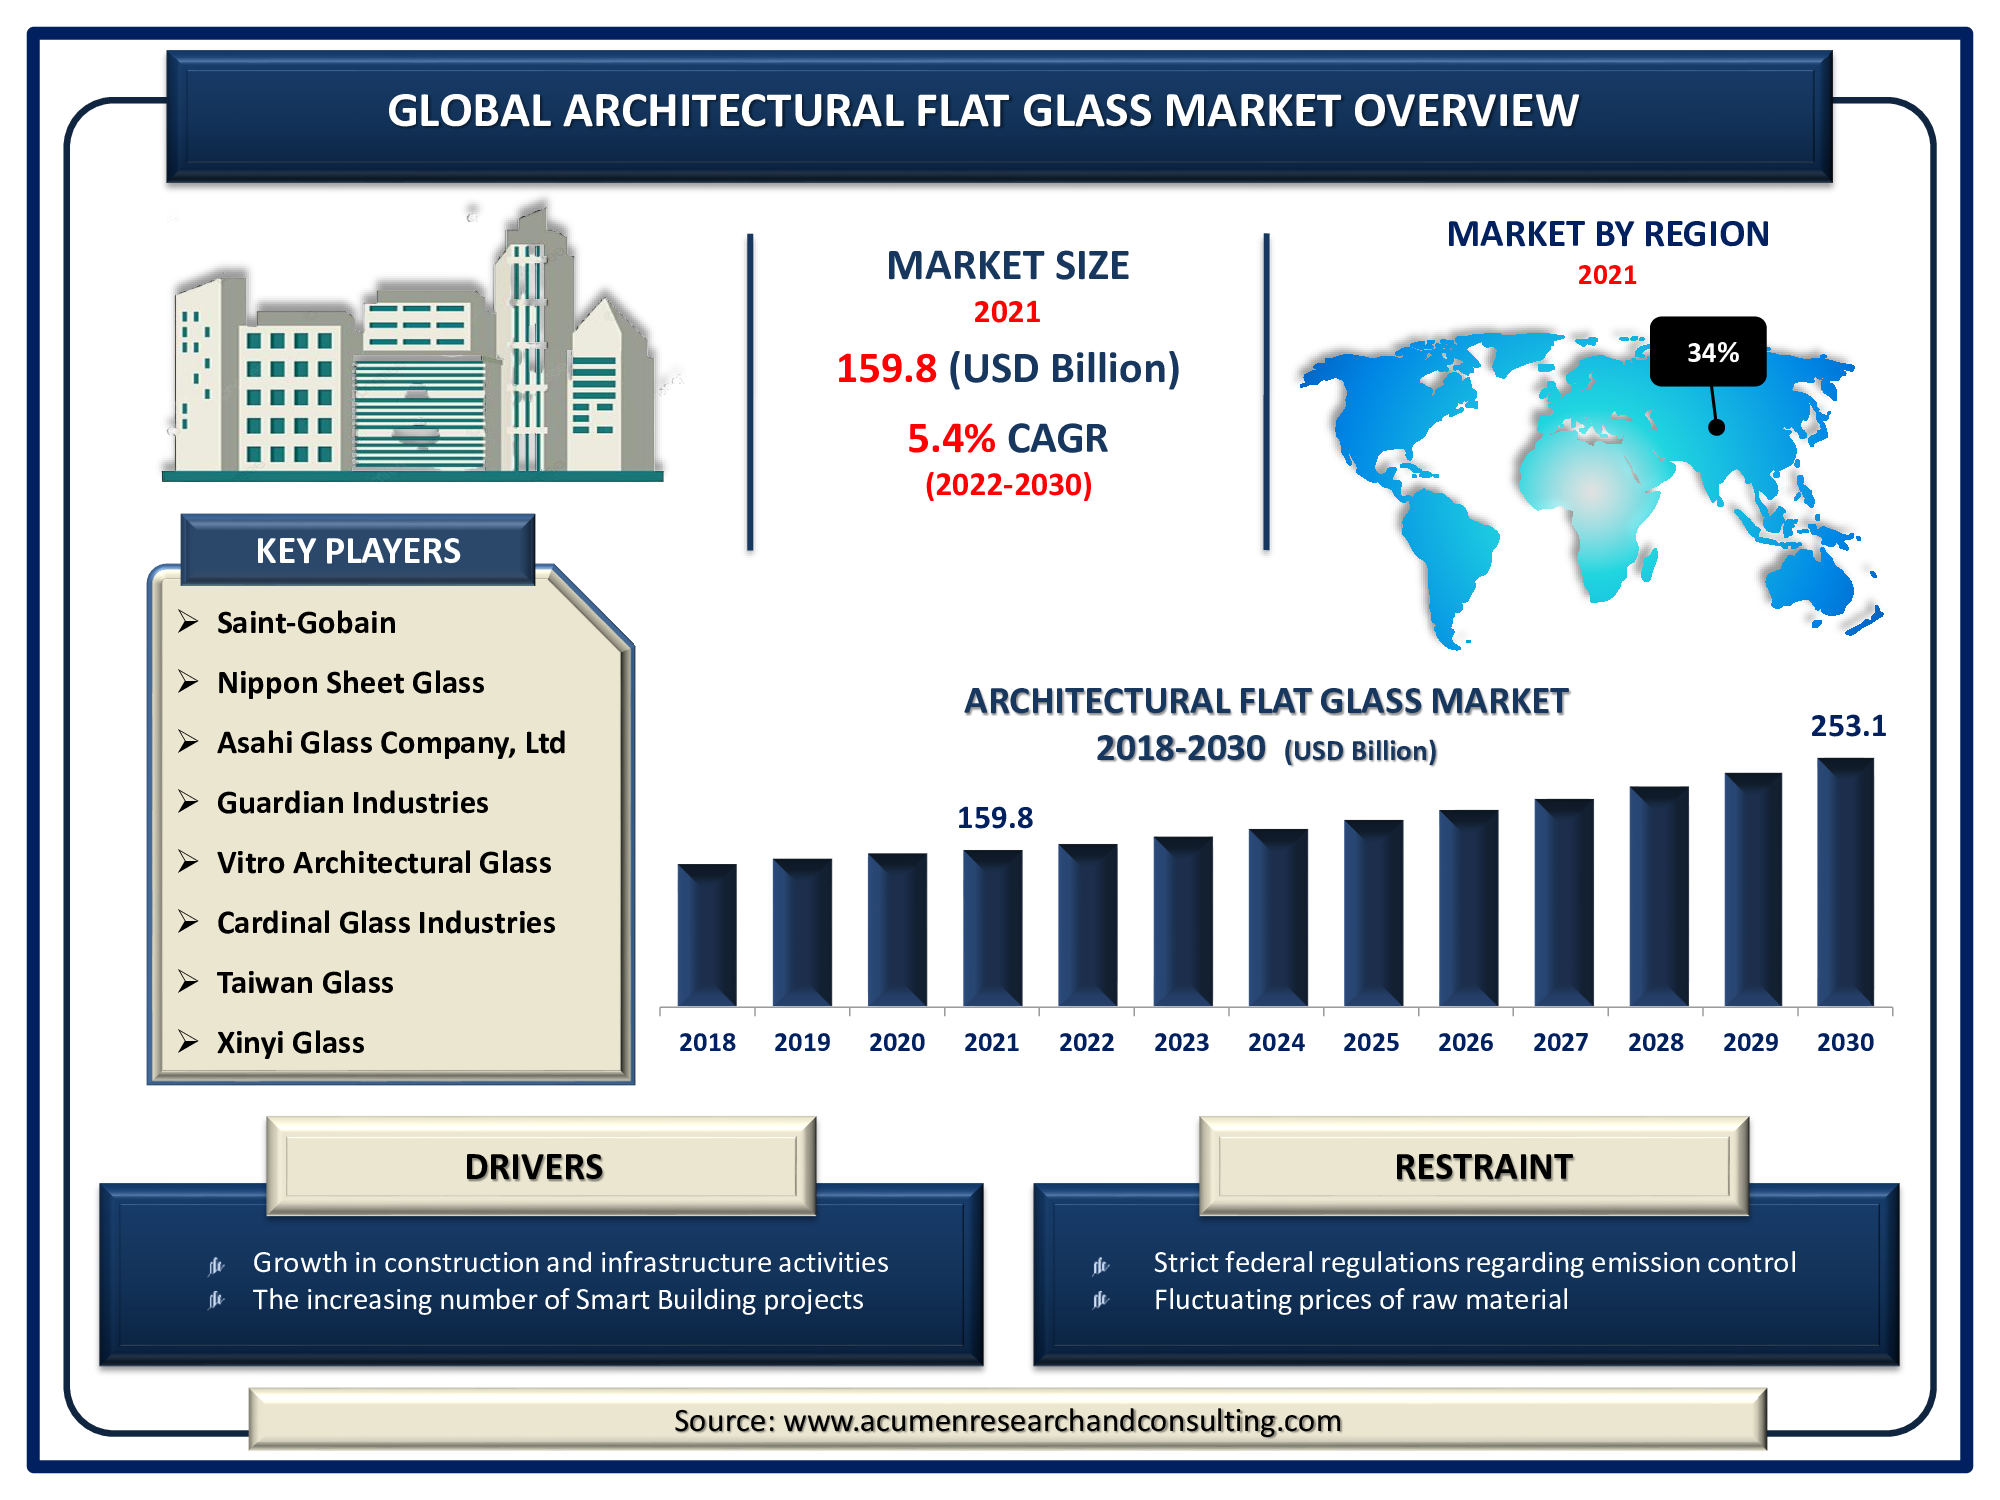 Architectural Flat Glass Market size accounted for USD 159.8 Billion in 2021 and is expected to reach USD 253.1 Billion by 2030 with a considerable CAGR of 5.4%